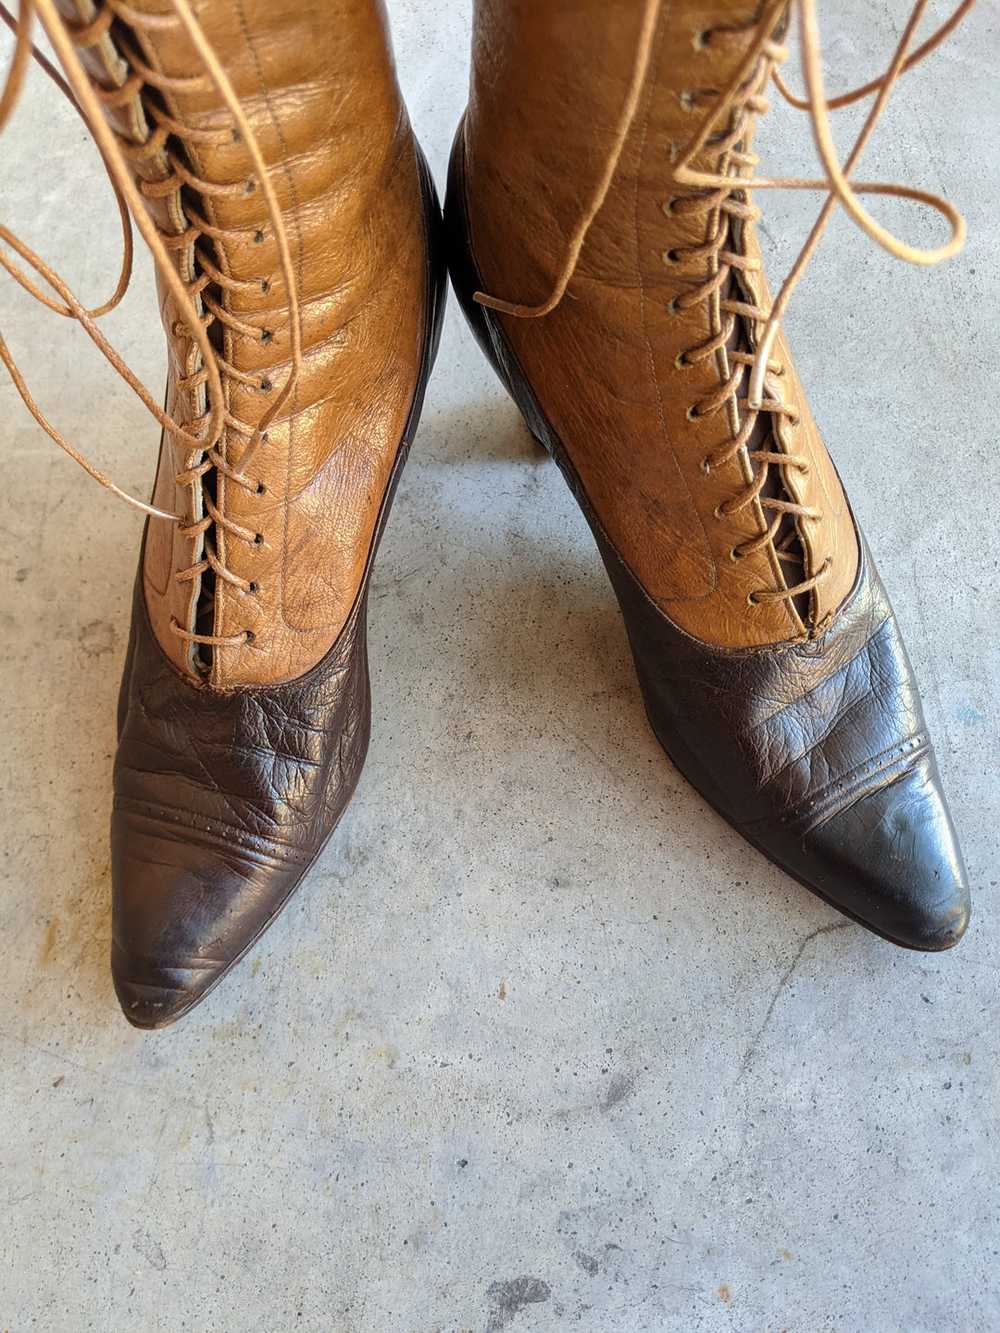 c. 1910s-1920s Two-Tone Brown Boots | Approx Sz 6 - image 5